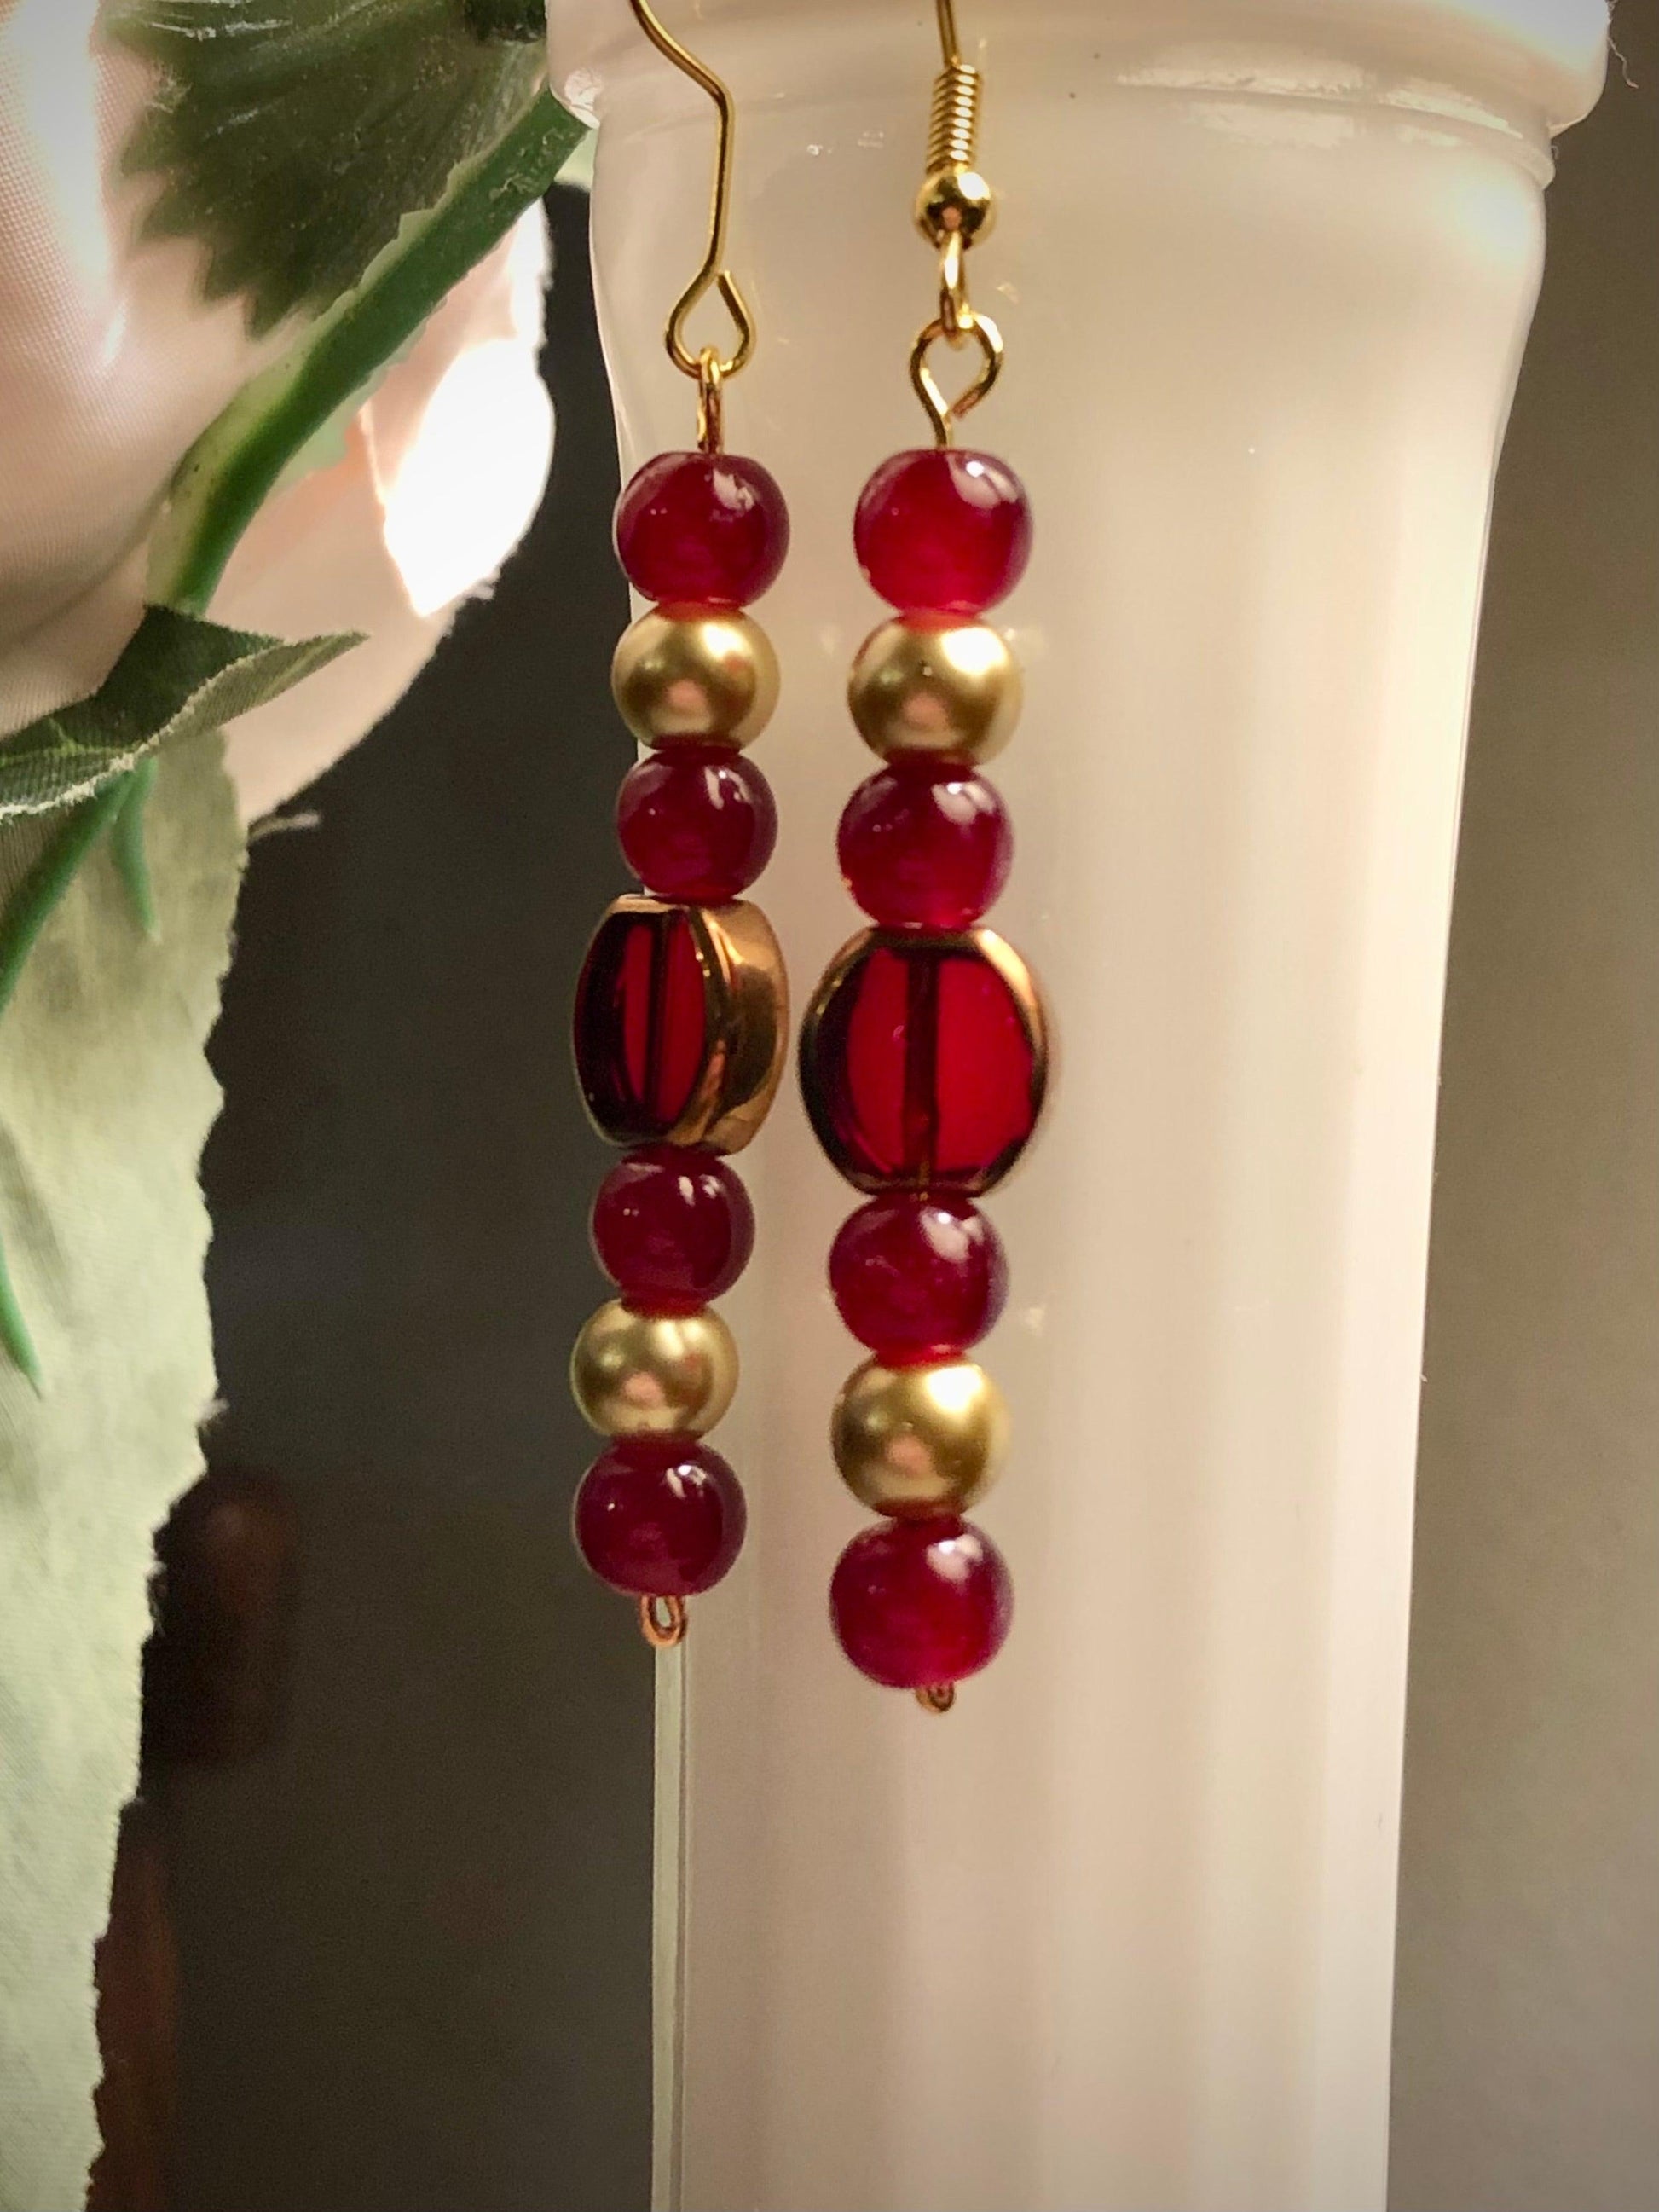 Art Deco Inspired Vivid Red and Yellow Gold Tined Glads Beads 1 7/8” Long Dangle Earrings Women’s Gift 2022 - Monkeysmojo